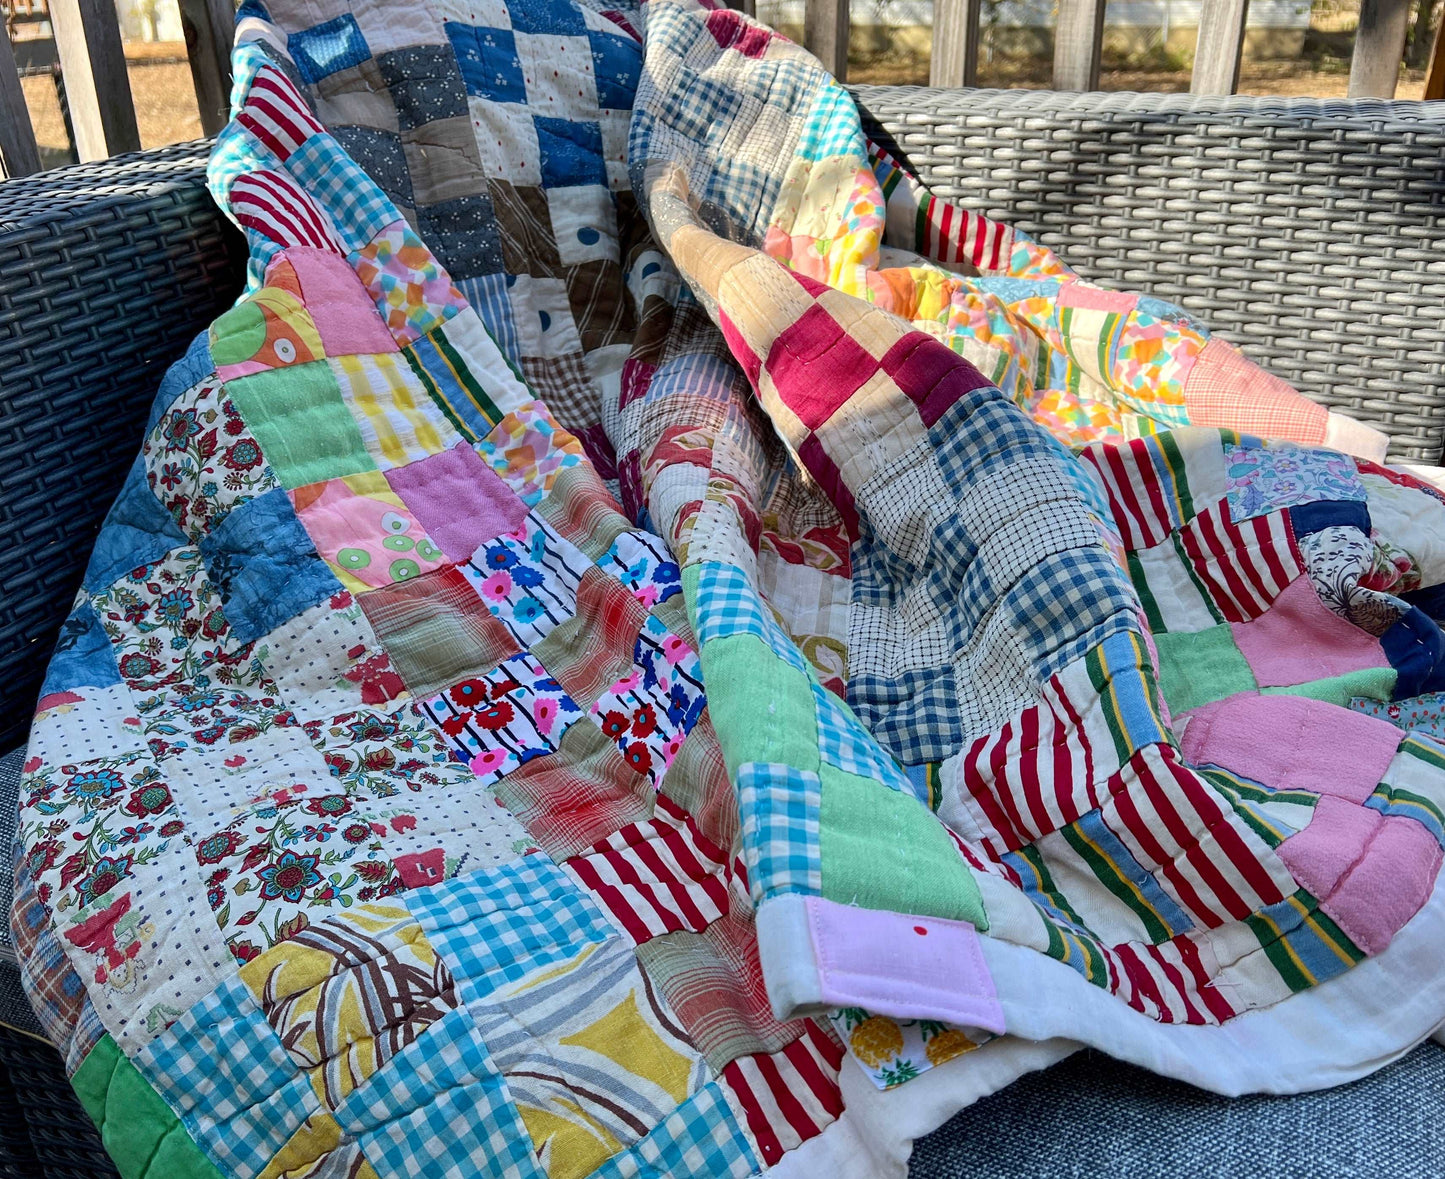 9 Vintage Quilt - Colorful Neon Nine Squares - Quilt Art - Full Sized, folded and bundled on an outside chair, very inviting cuddly quilt